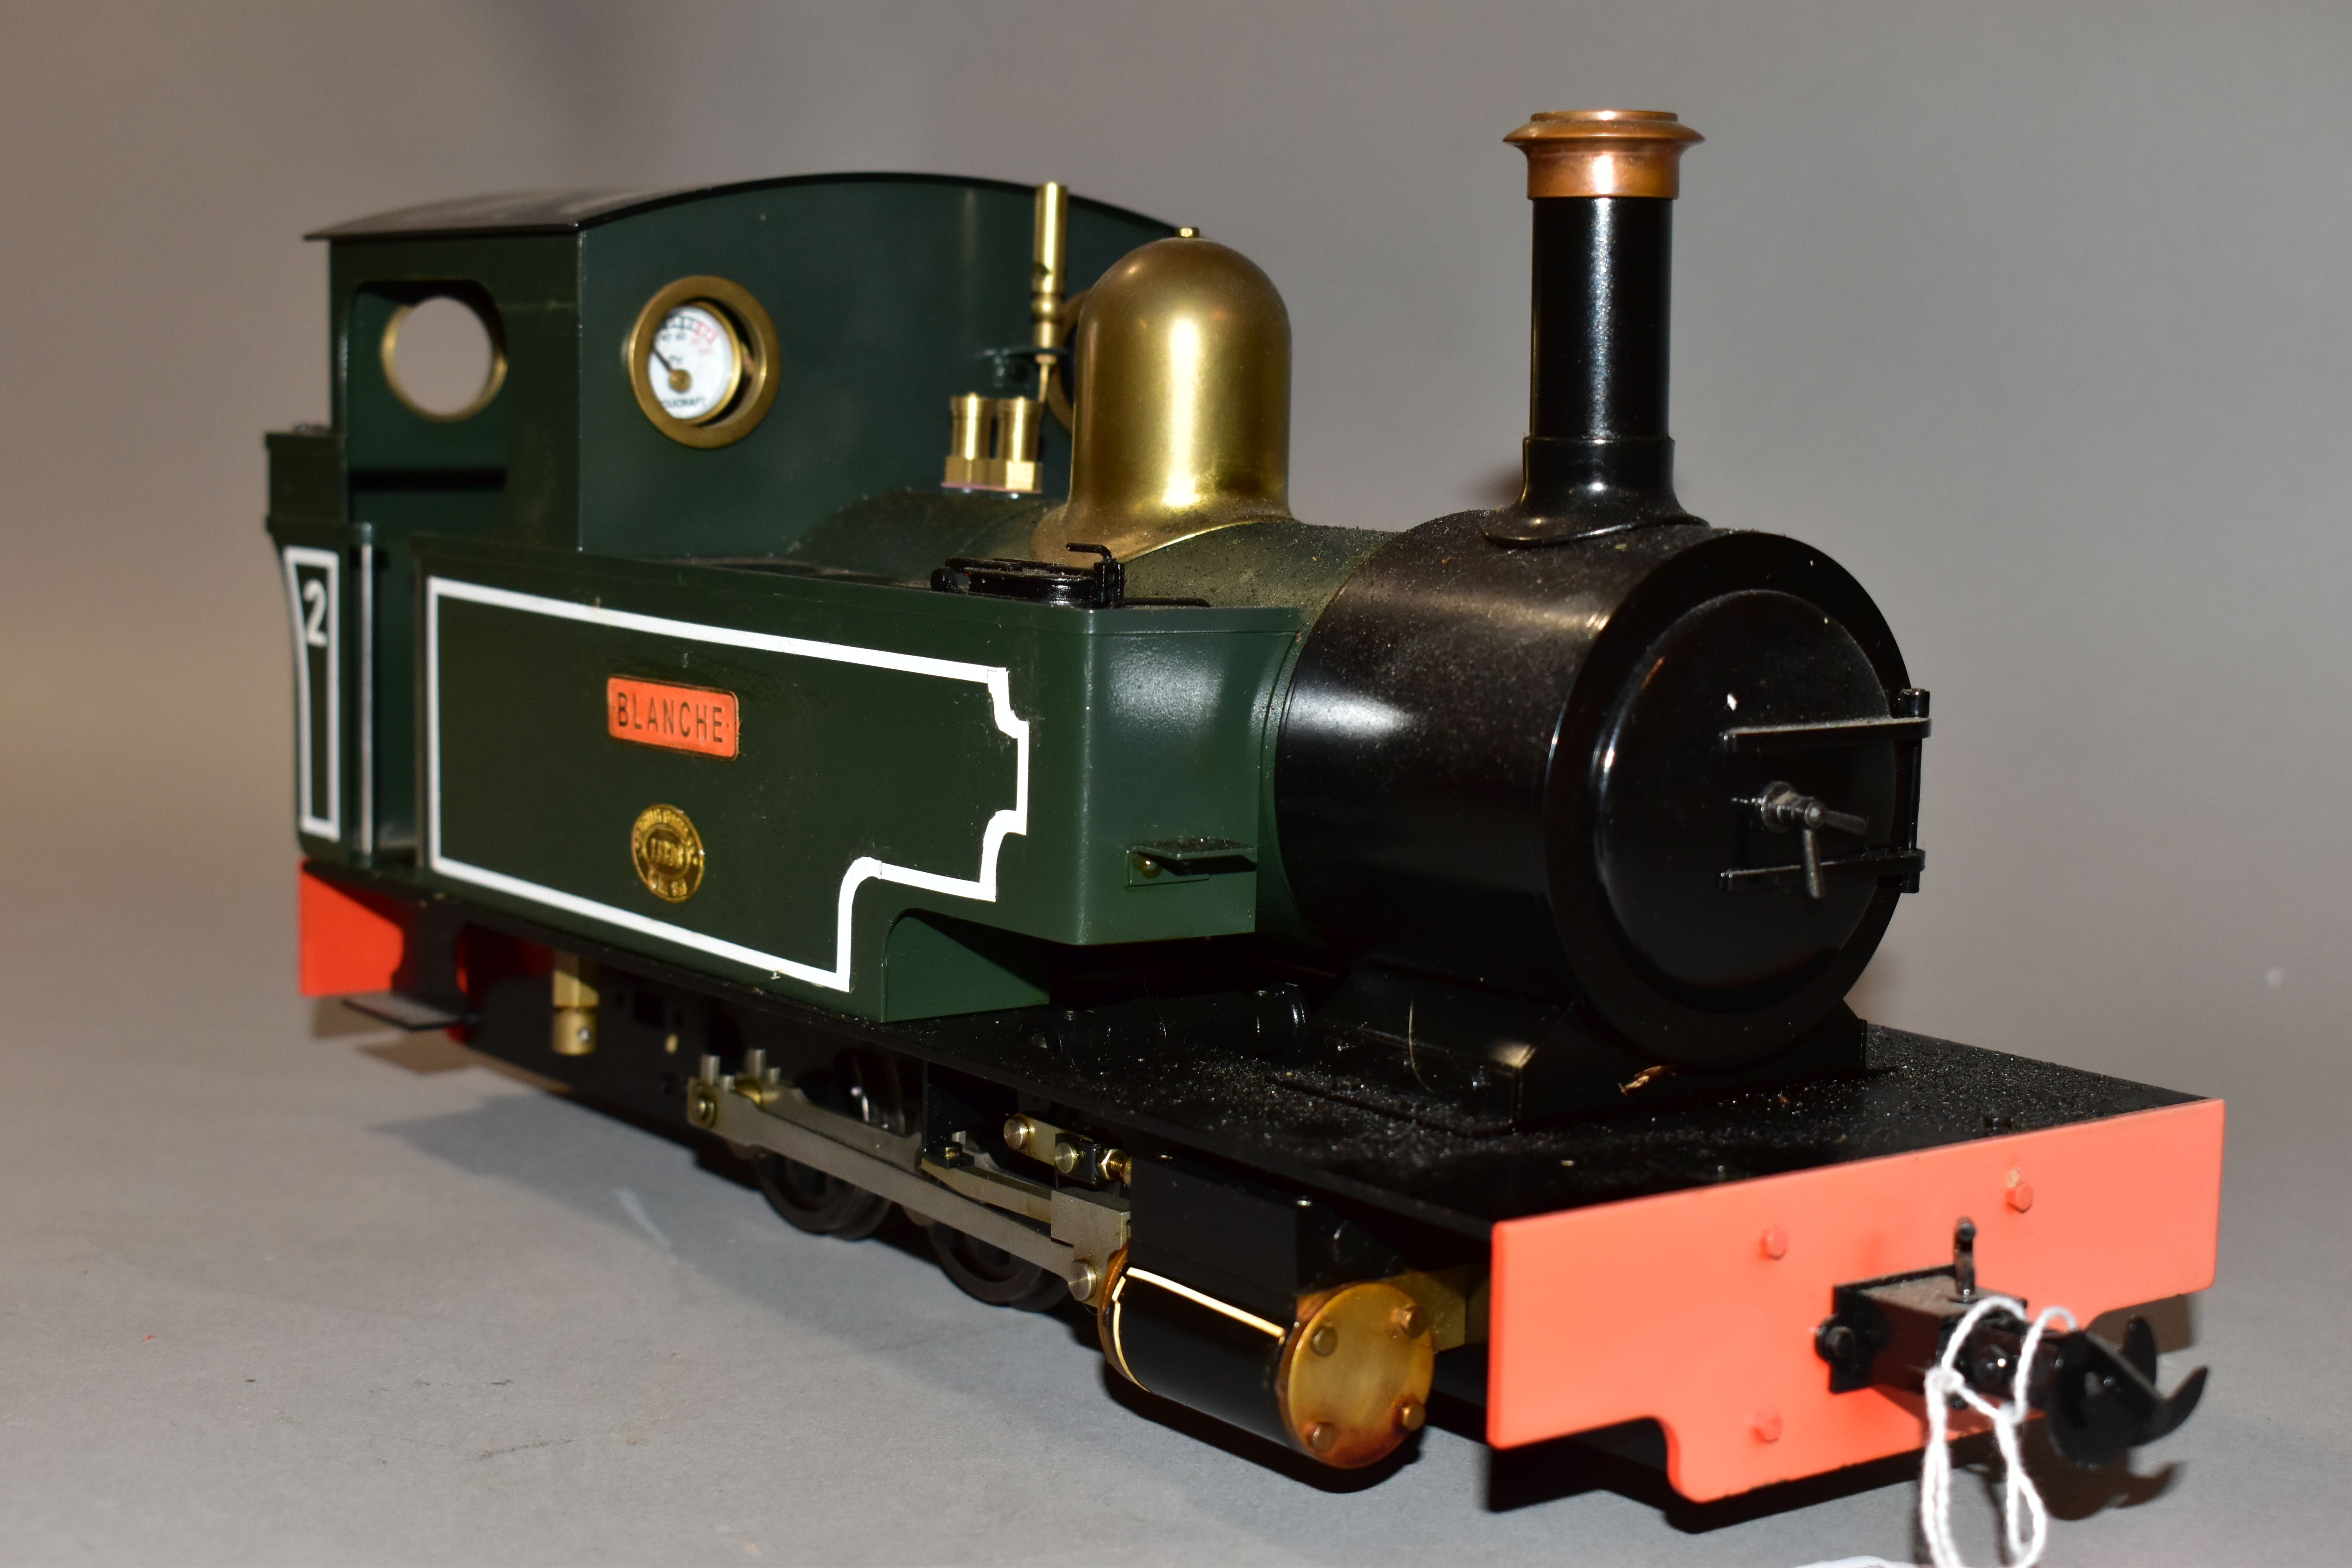 AN UNBOXED ACCUCRAFT TRAINS BY BMMC HUNSLET 0-6-0 SIDE TANK LIVE STEAM LOCOMOTIVE, 'Blanche' No.2 - Image 2 of 5